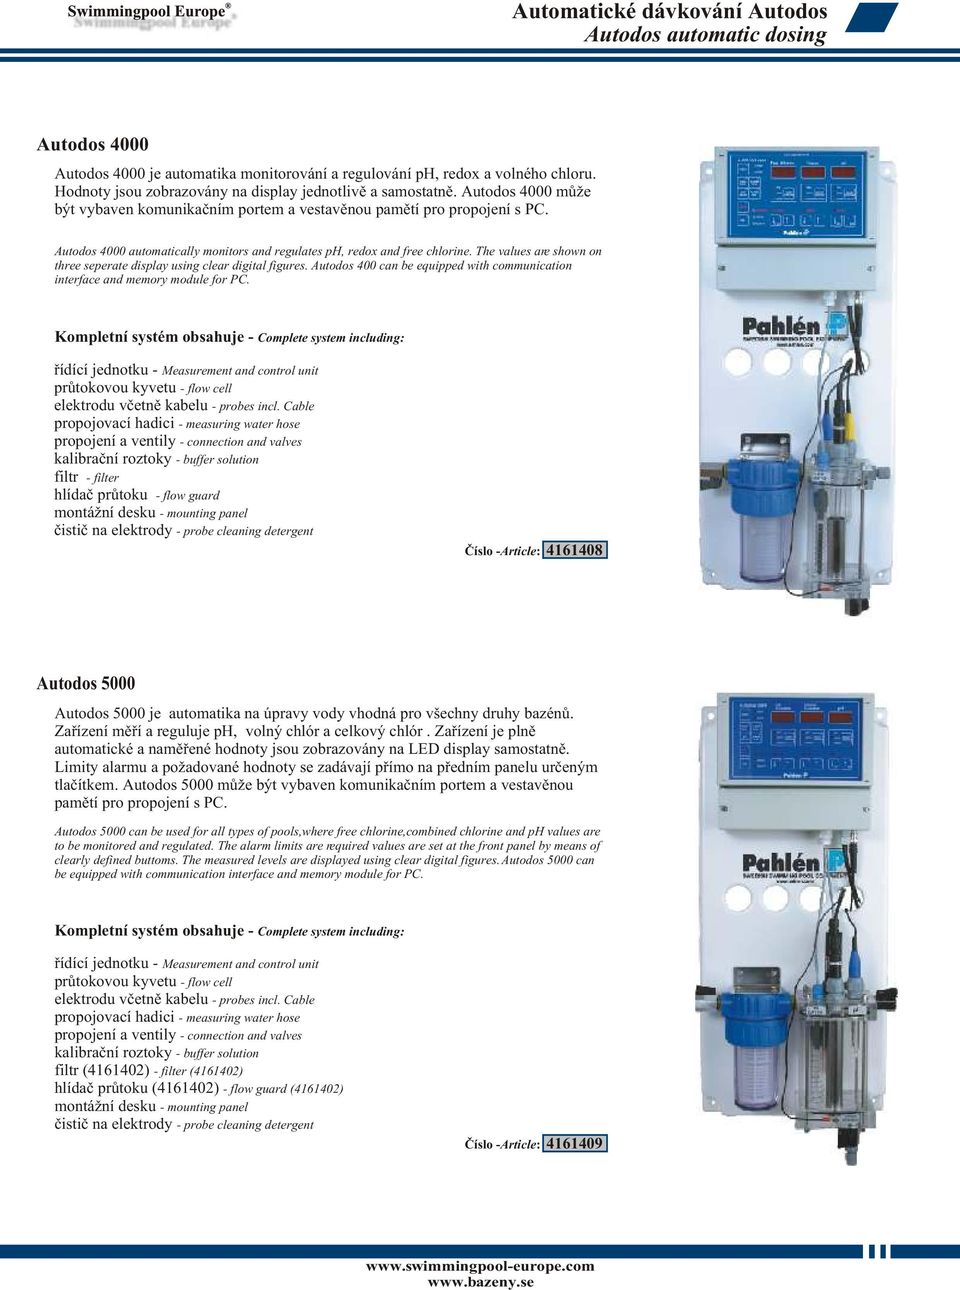 Autodos 4000 automatically monitors and regulates ph, redox and free chlorine. The values are shown on three seperate display using clear digital figures.